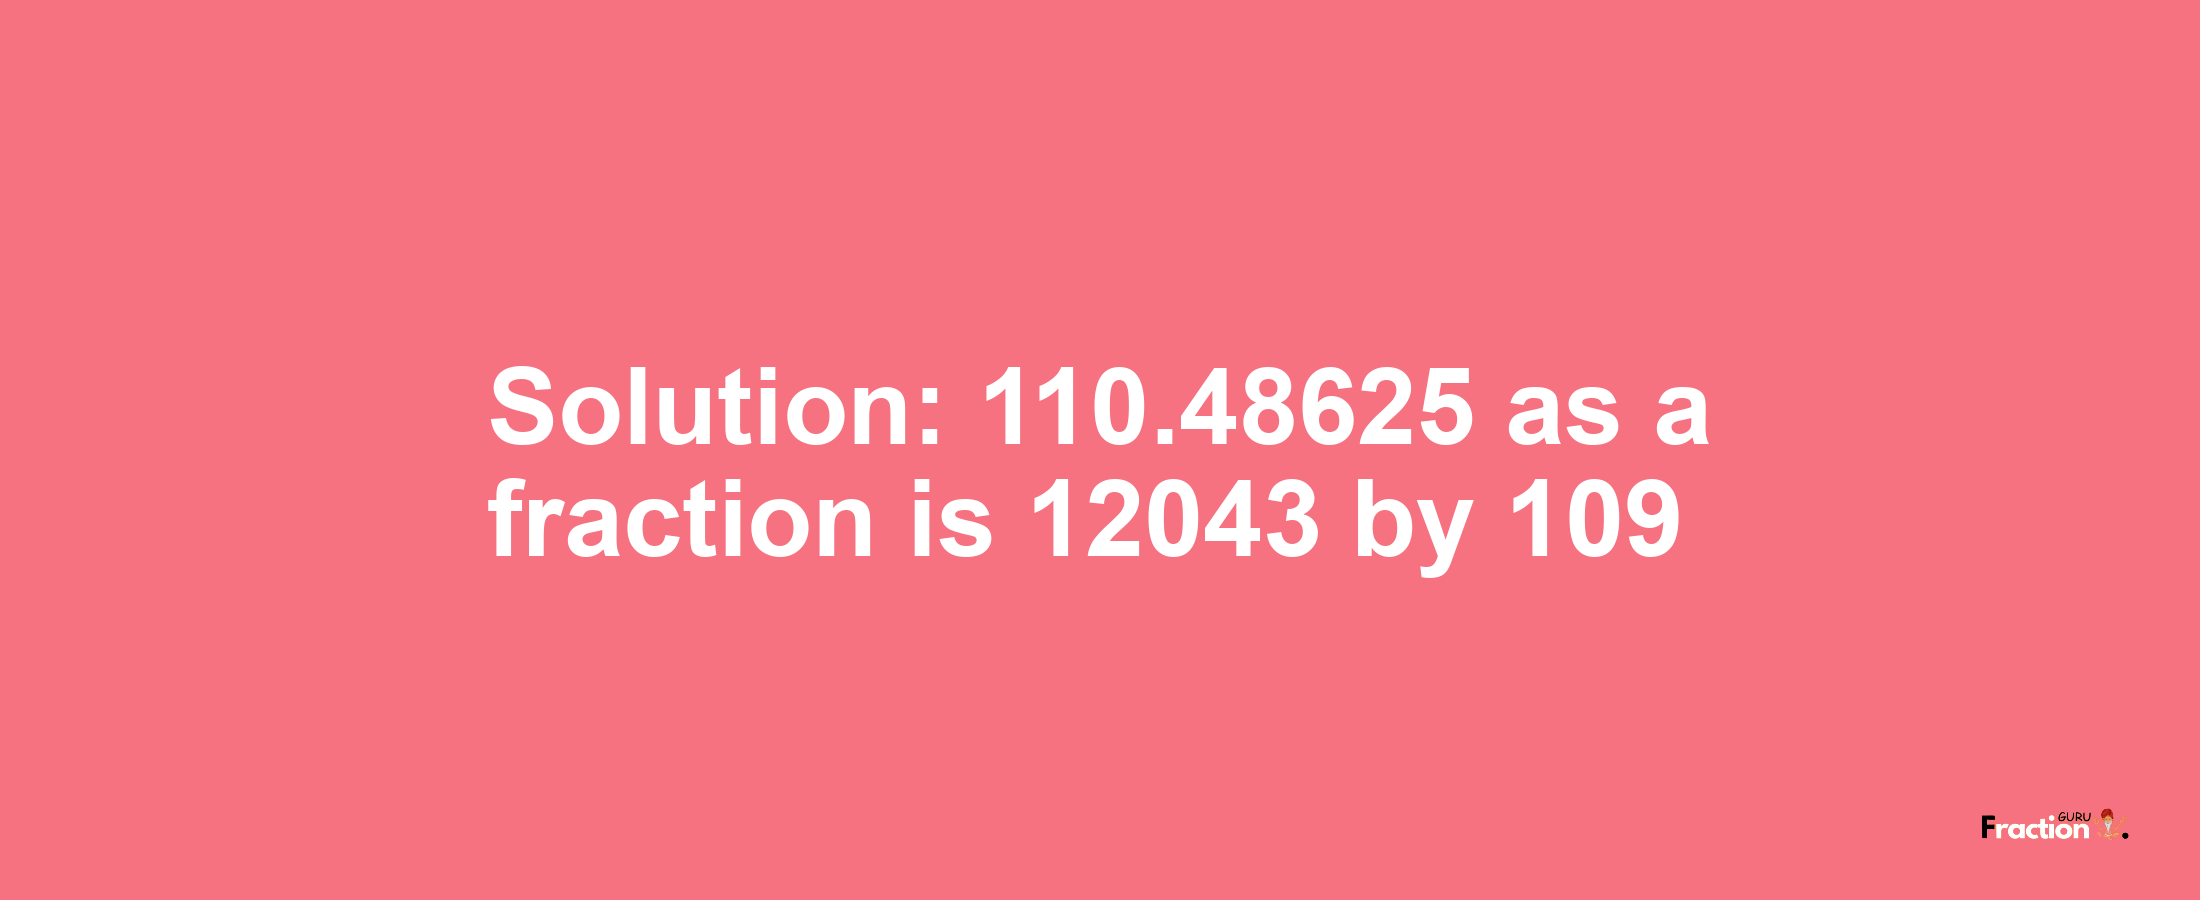 Solution:110.48625 as a fraction is 12043/109